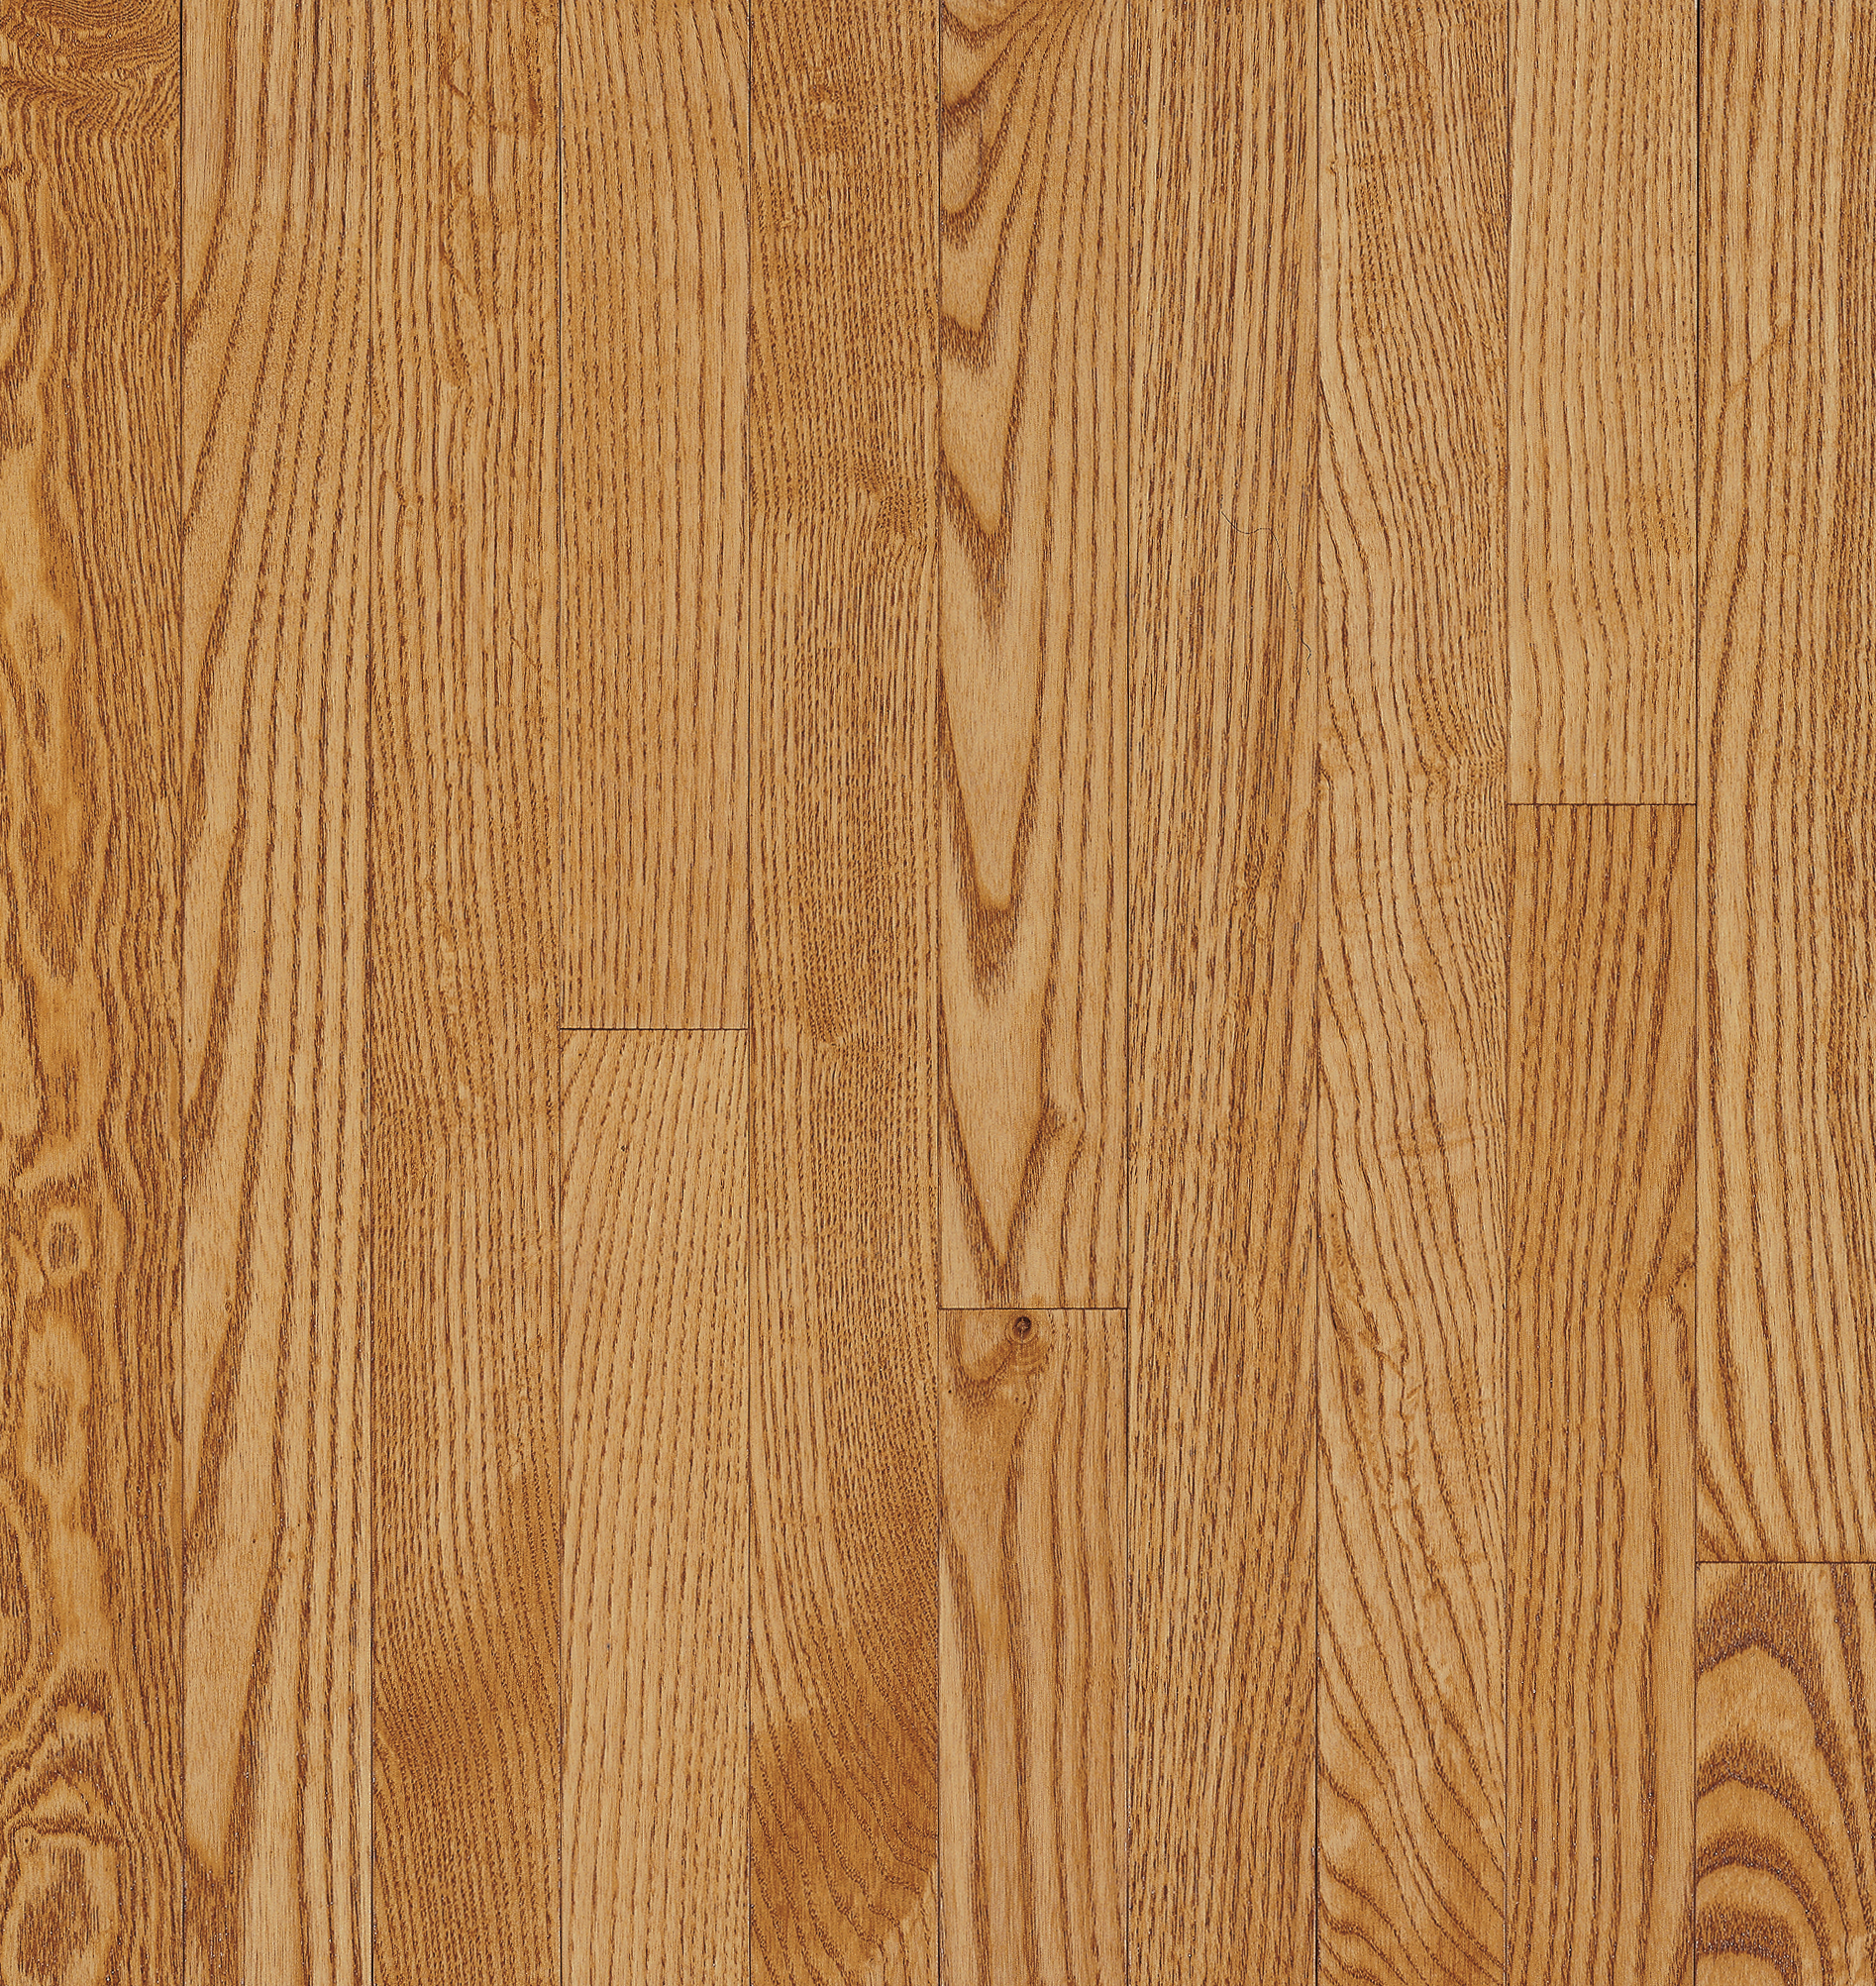 Dundee Spice Solid Hardwood CB1214